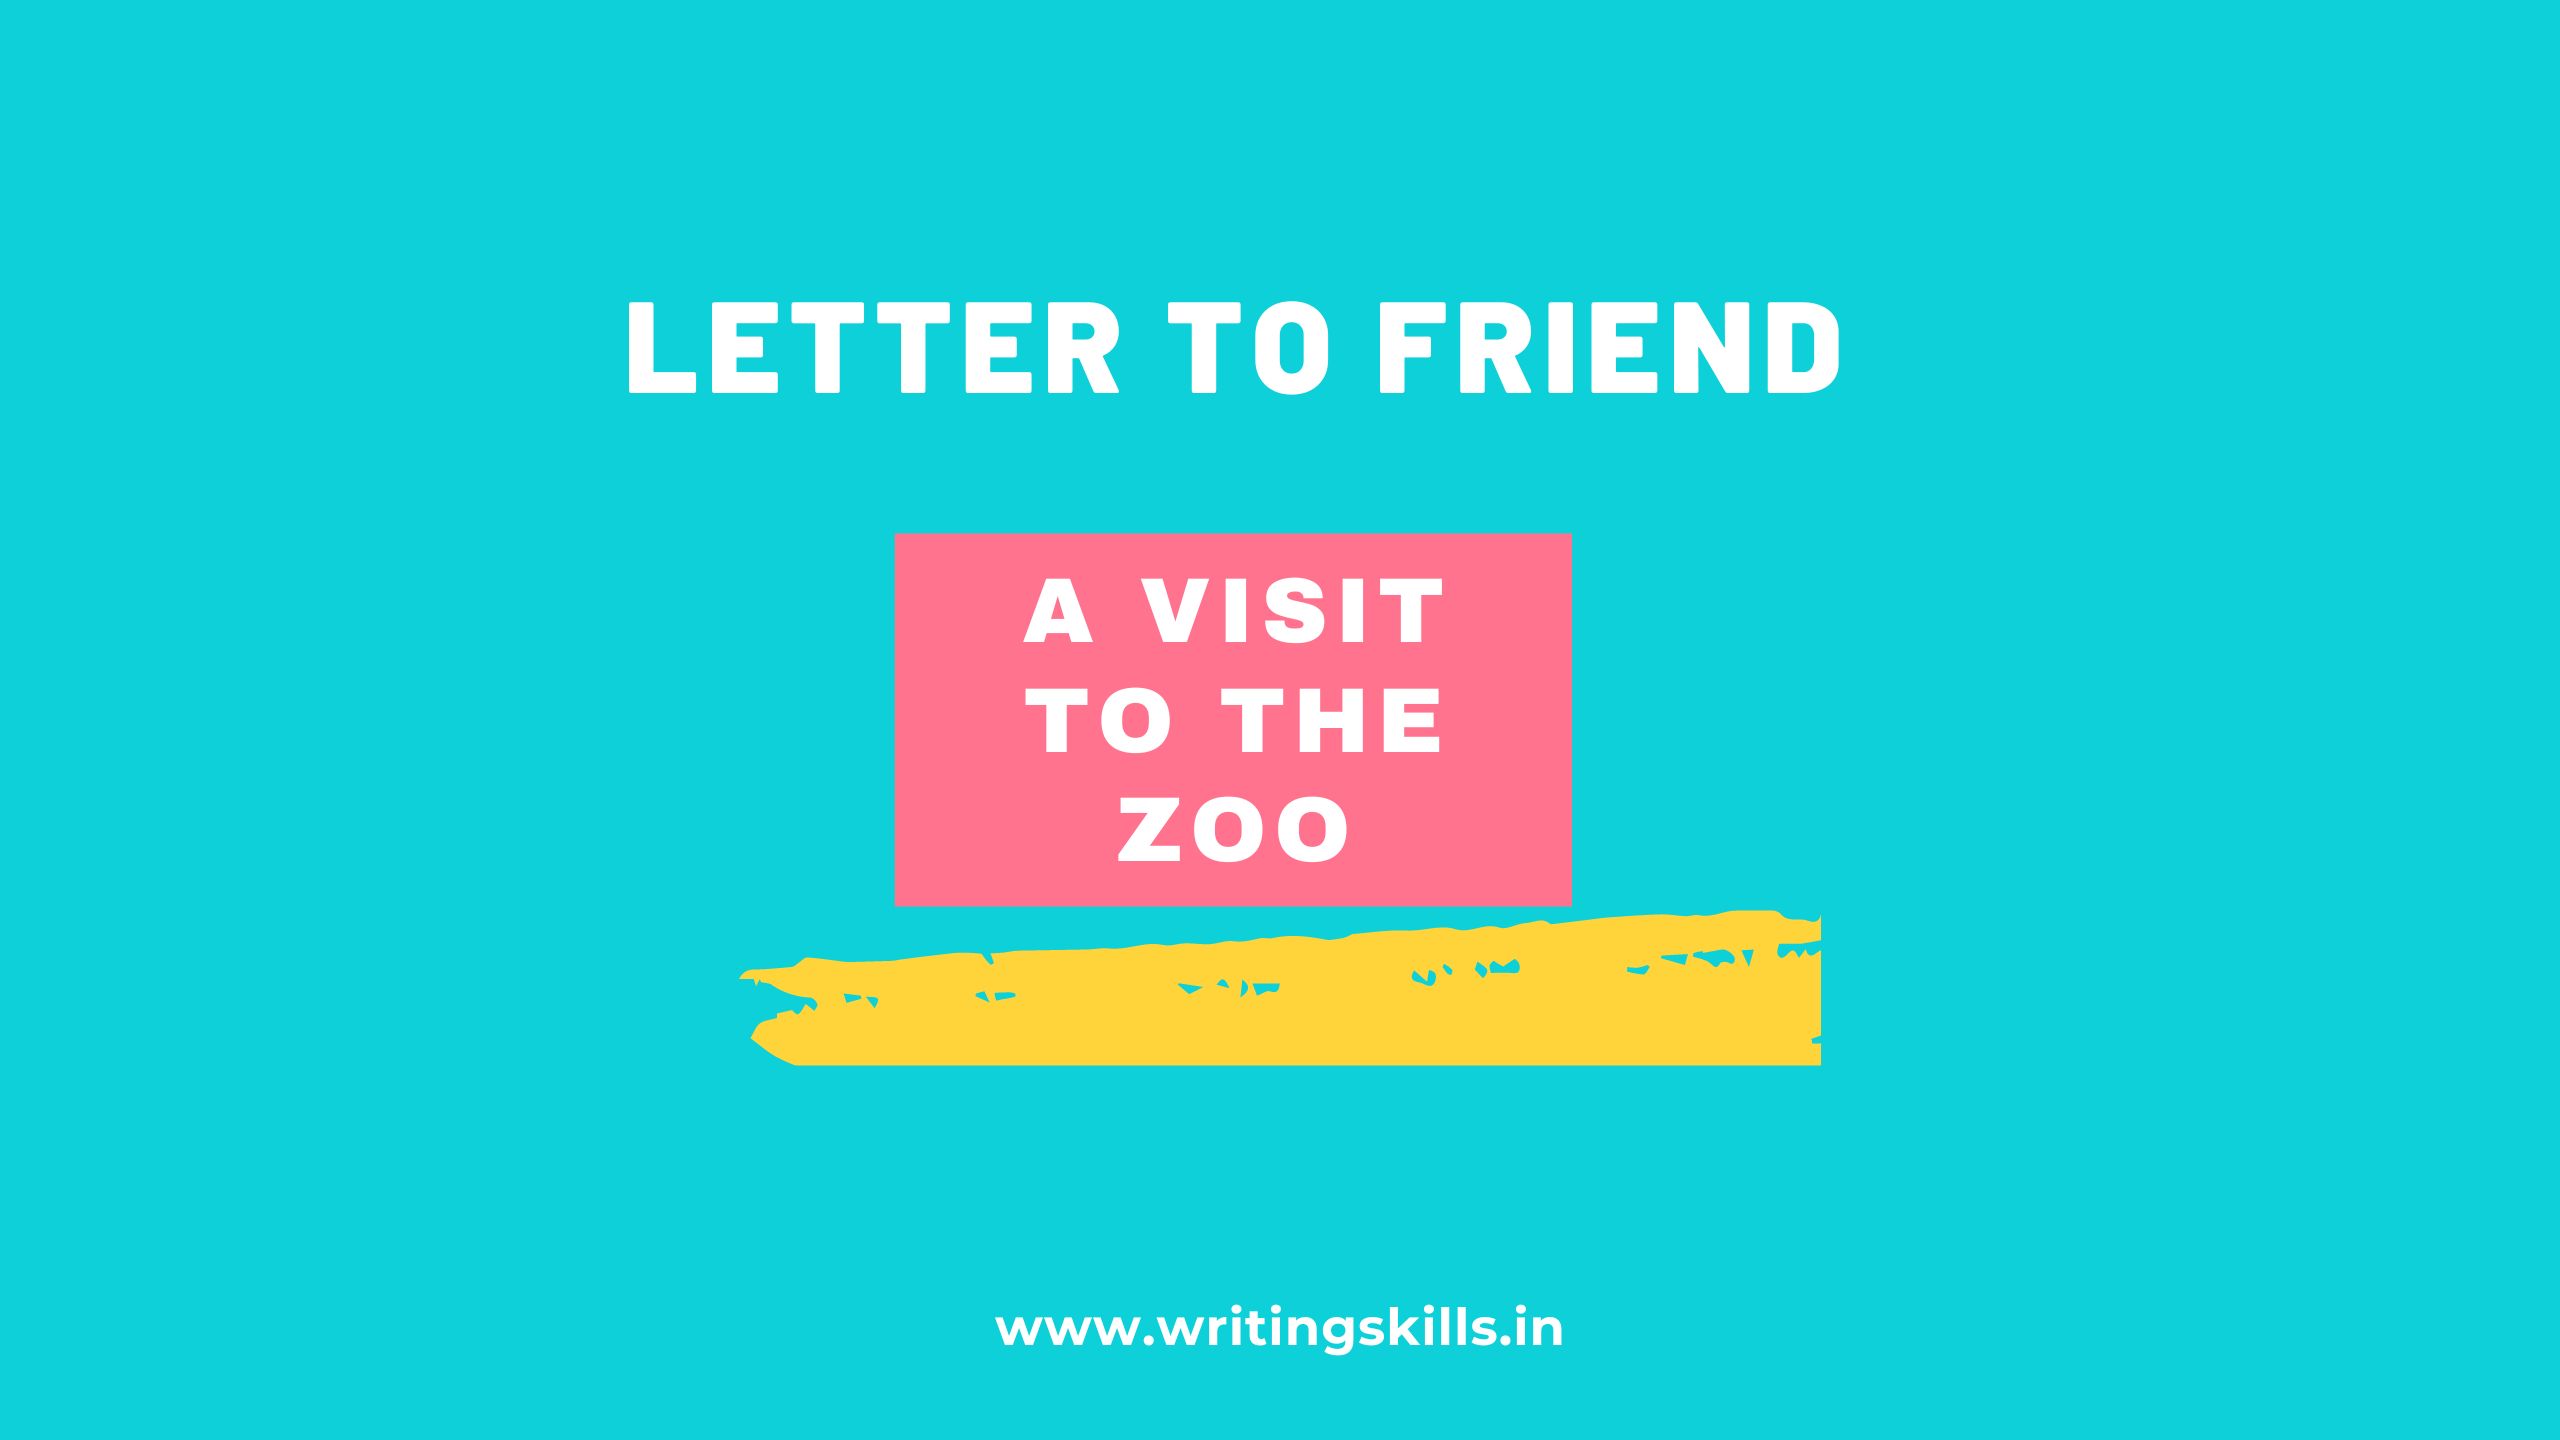 Write a letter your friend describing a visit to the zoo